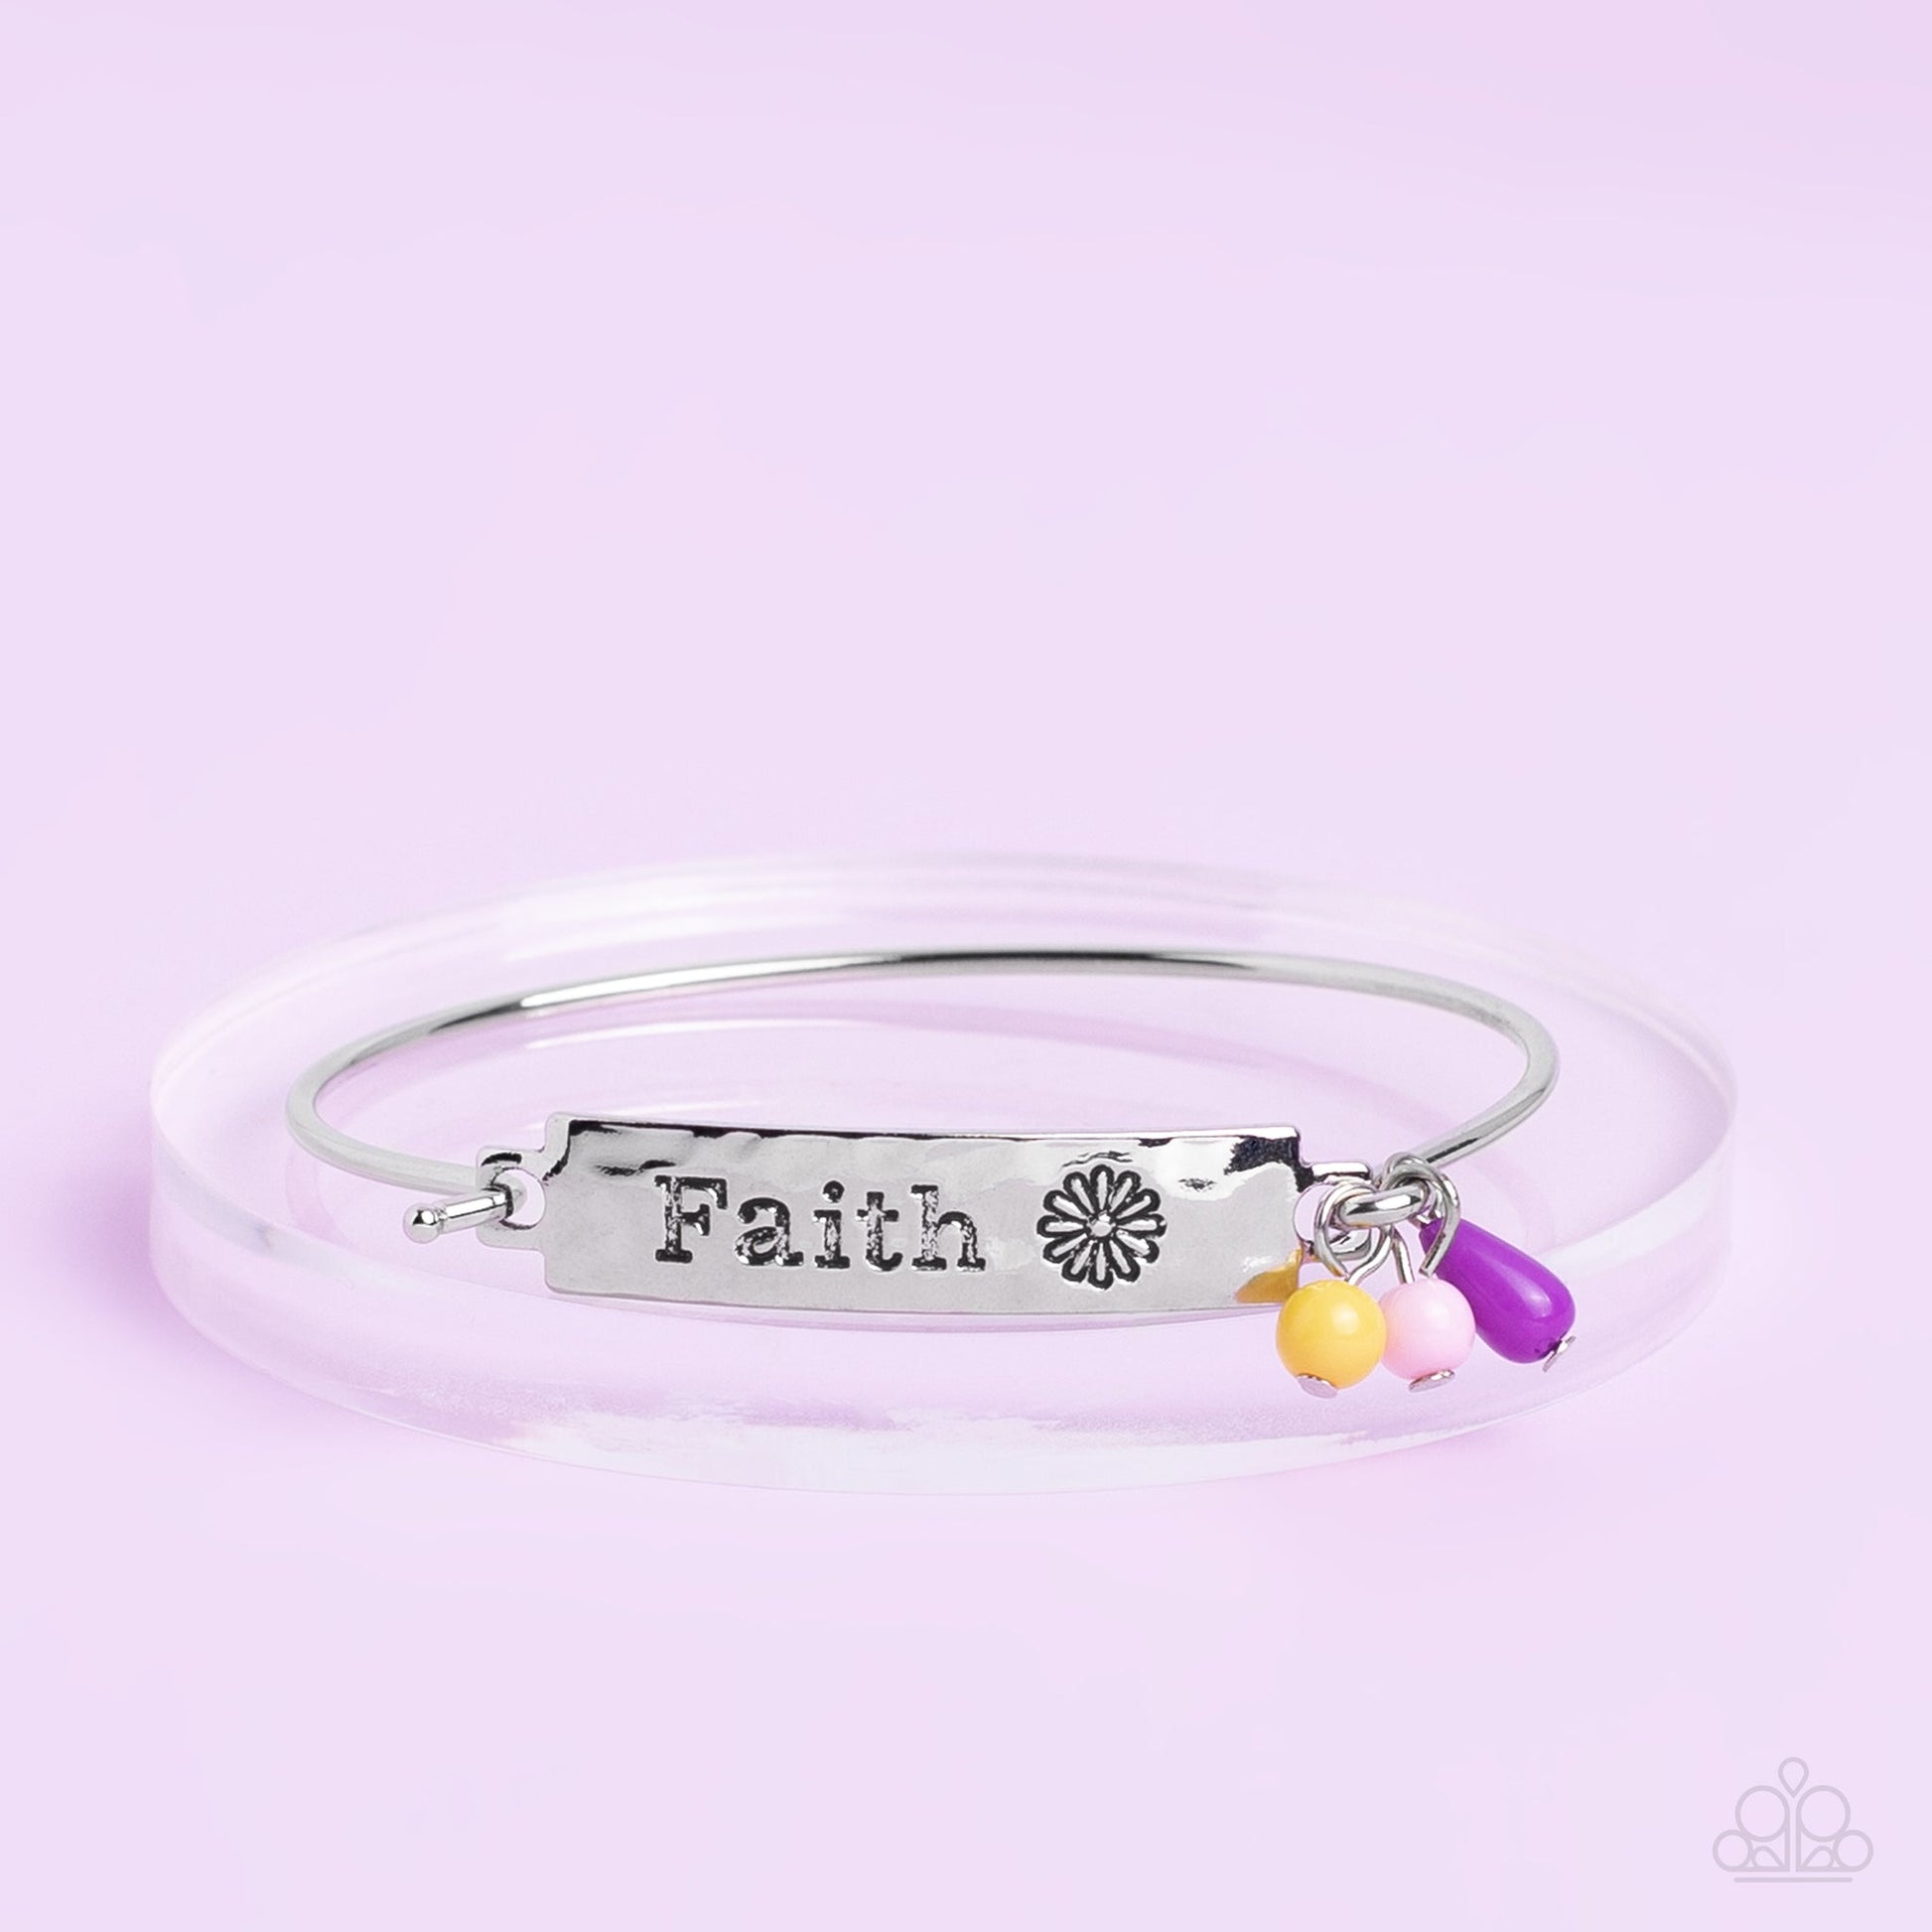 Flirting with Faith-Multi - Gtdazzlequeen